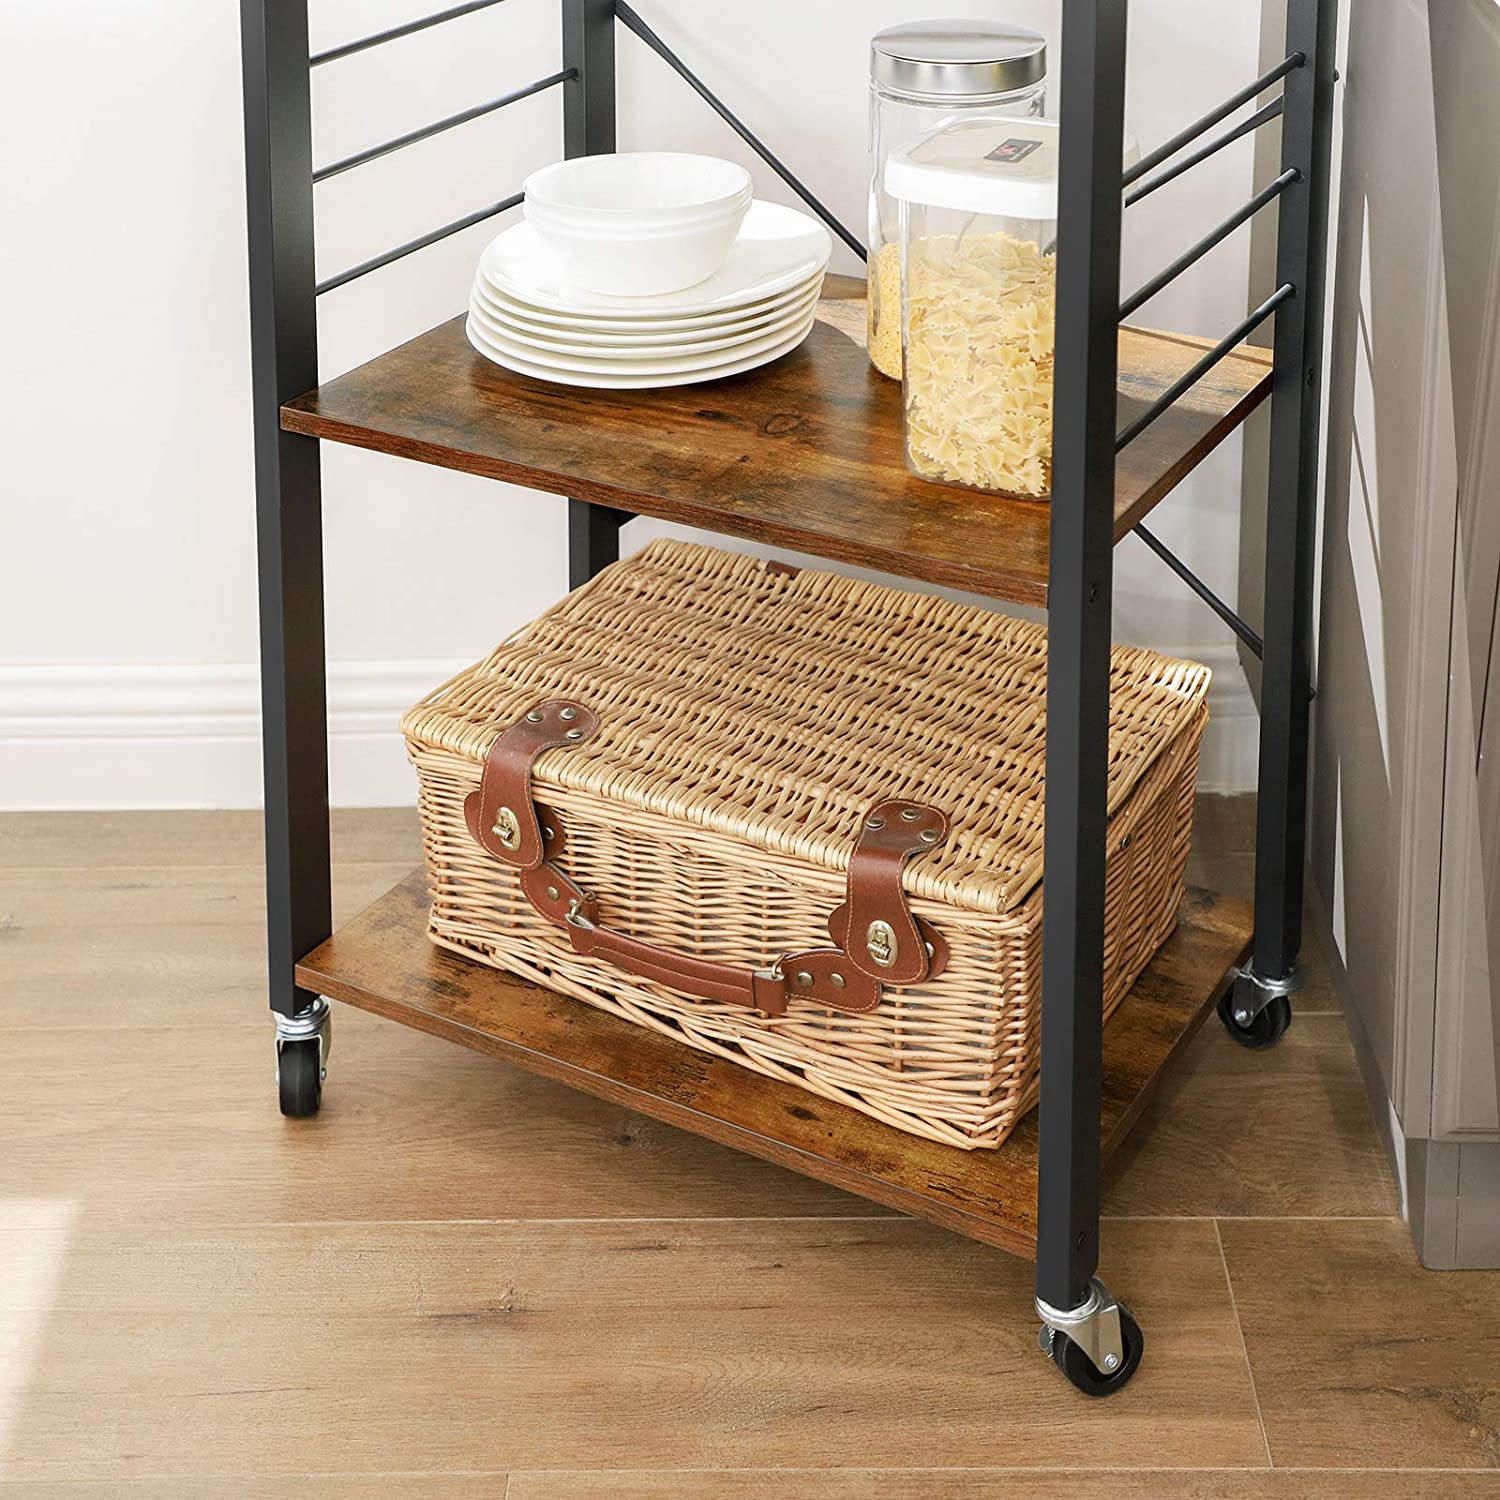 Kitchen Shelf on Wheels, Serving Trolley with 3 Shelves, Microwave Shelf, for Mini Oven, Toaster, Metal Frame with 6 Hooks, Industrial Design, Rustic Brown KKS60XV1 RAW58.dk 